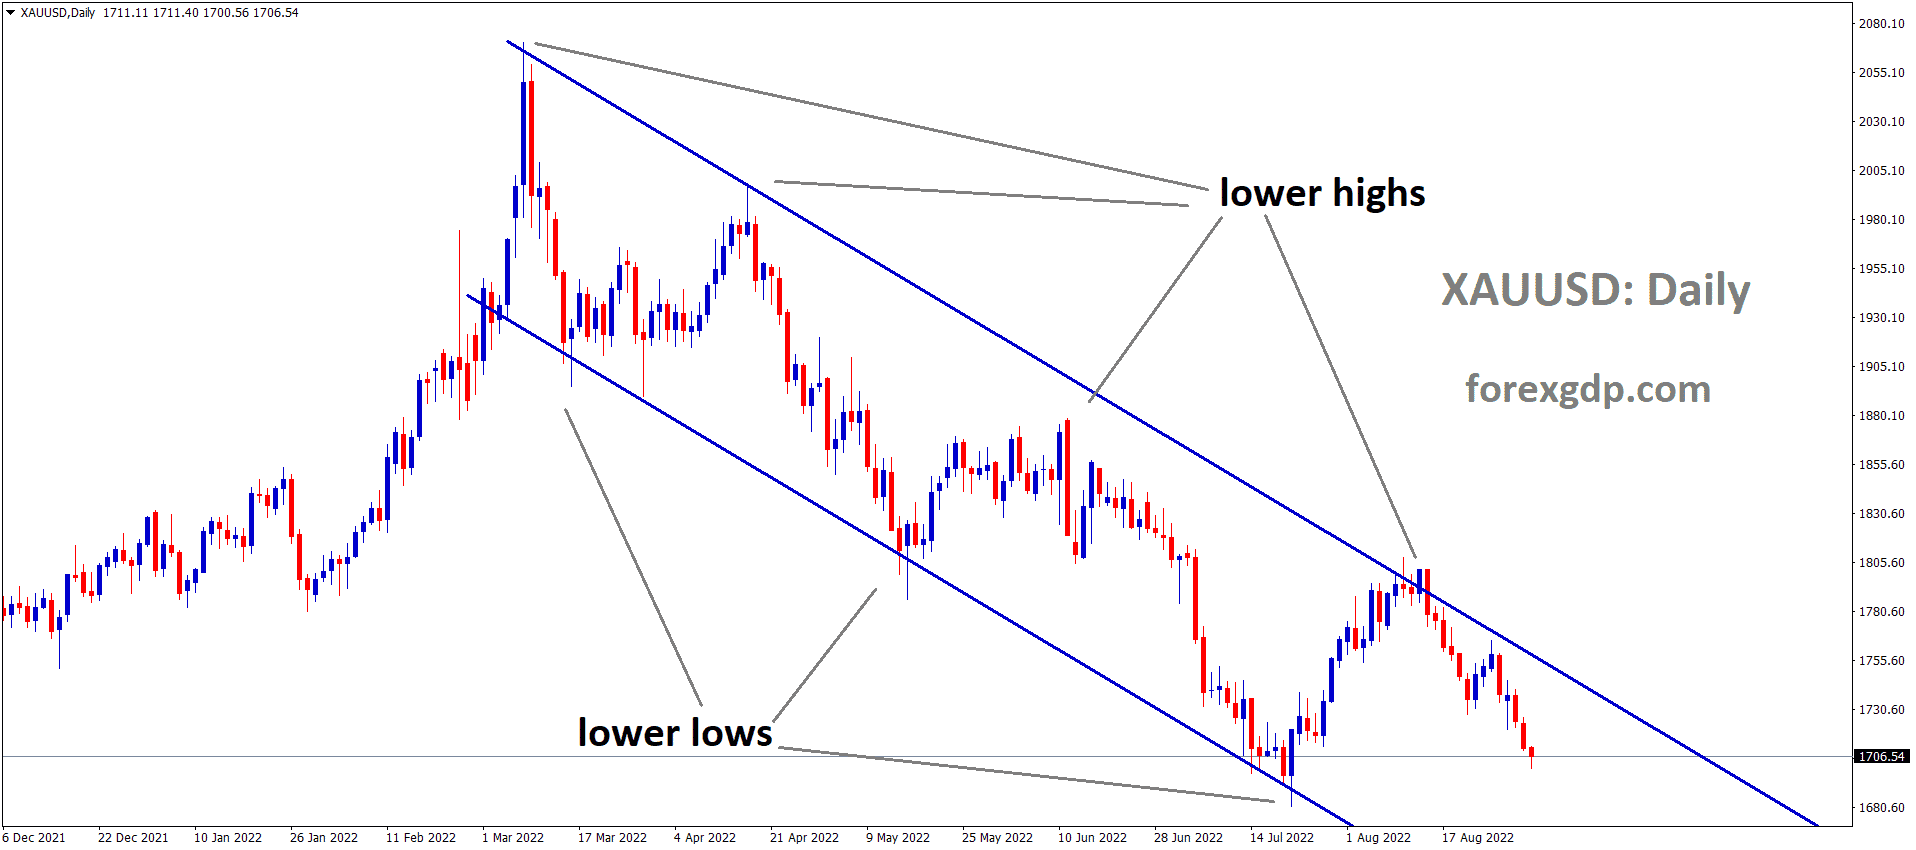 XAUUSD Gold price is moving in the Descending channel and the market has fallen from the lower high area of the channel